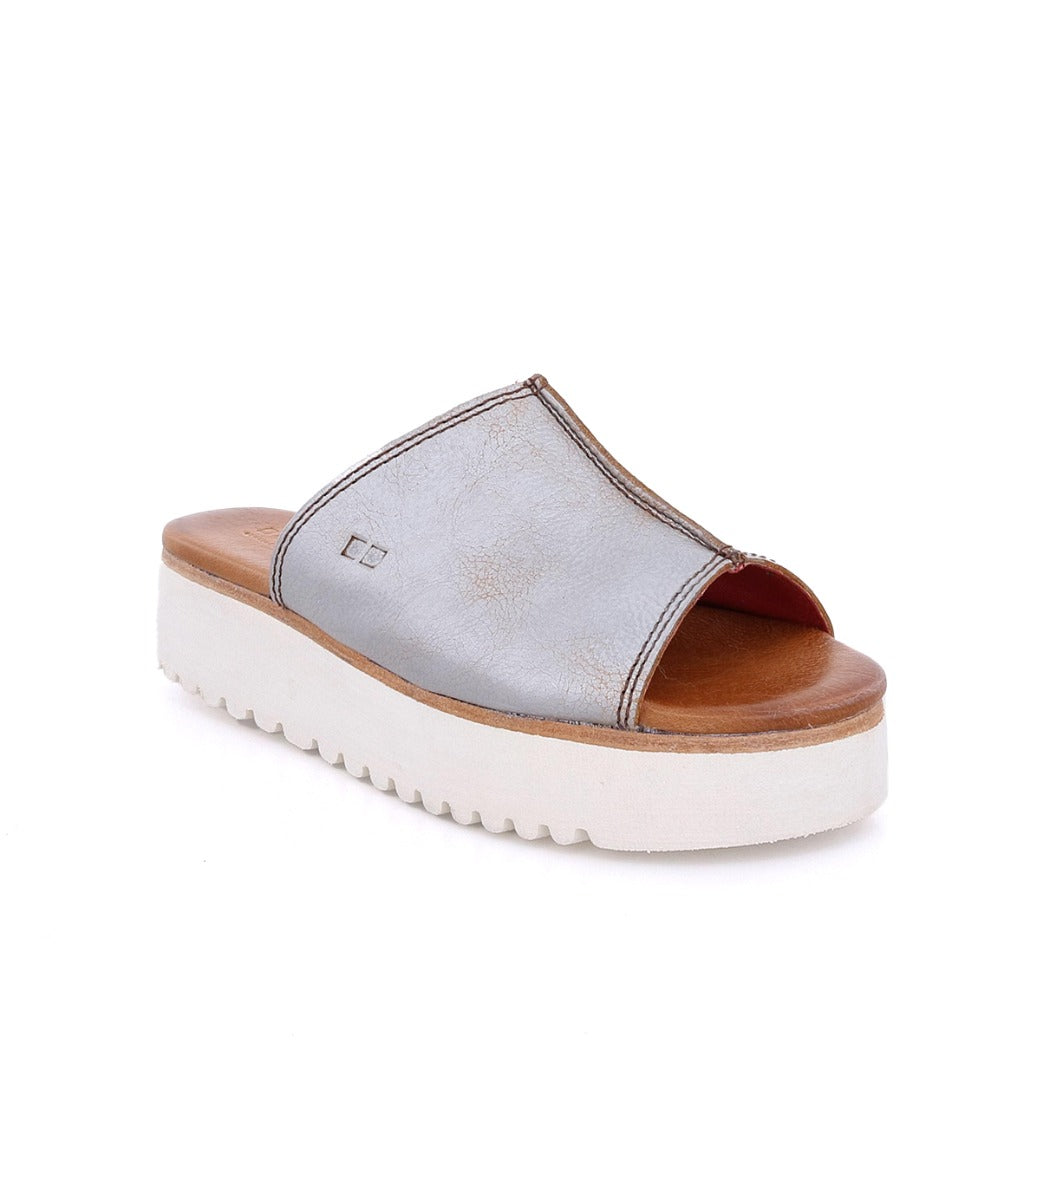 A women's Fairlee II slide sandal by Bed Stu with a white sole.